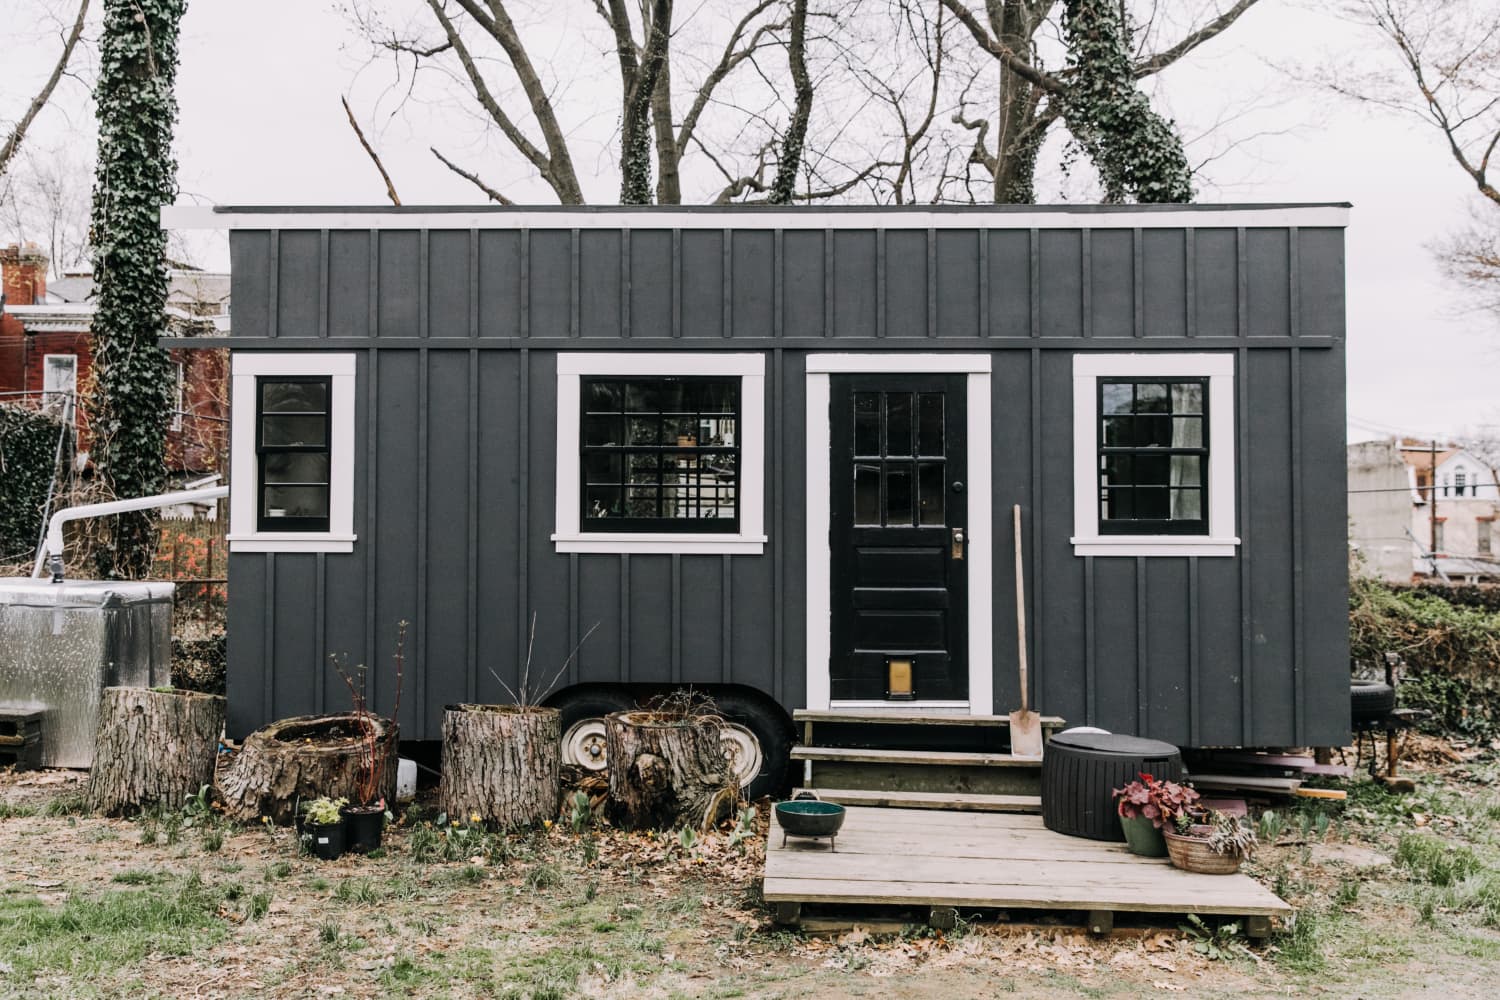 5 Great Places in the U.S. to Live in a Tiny House